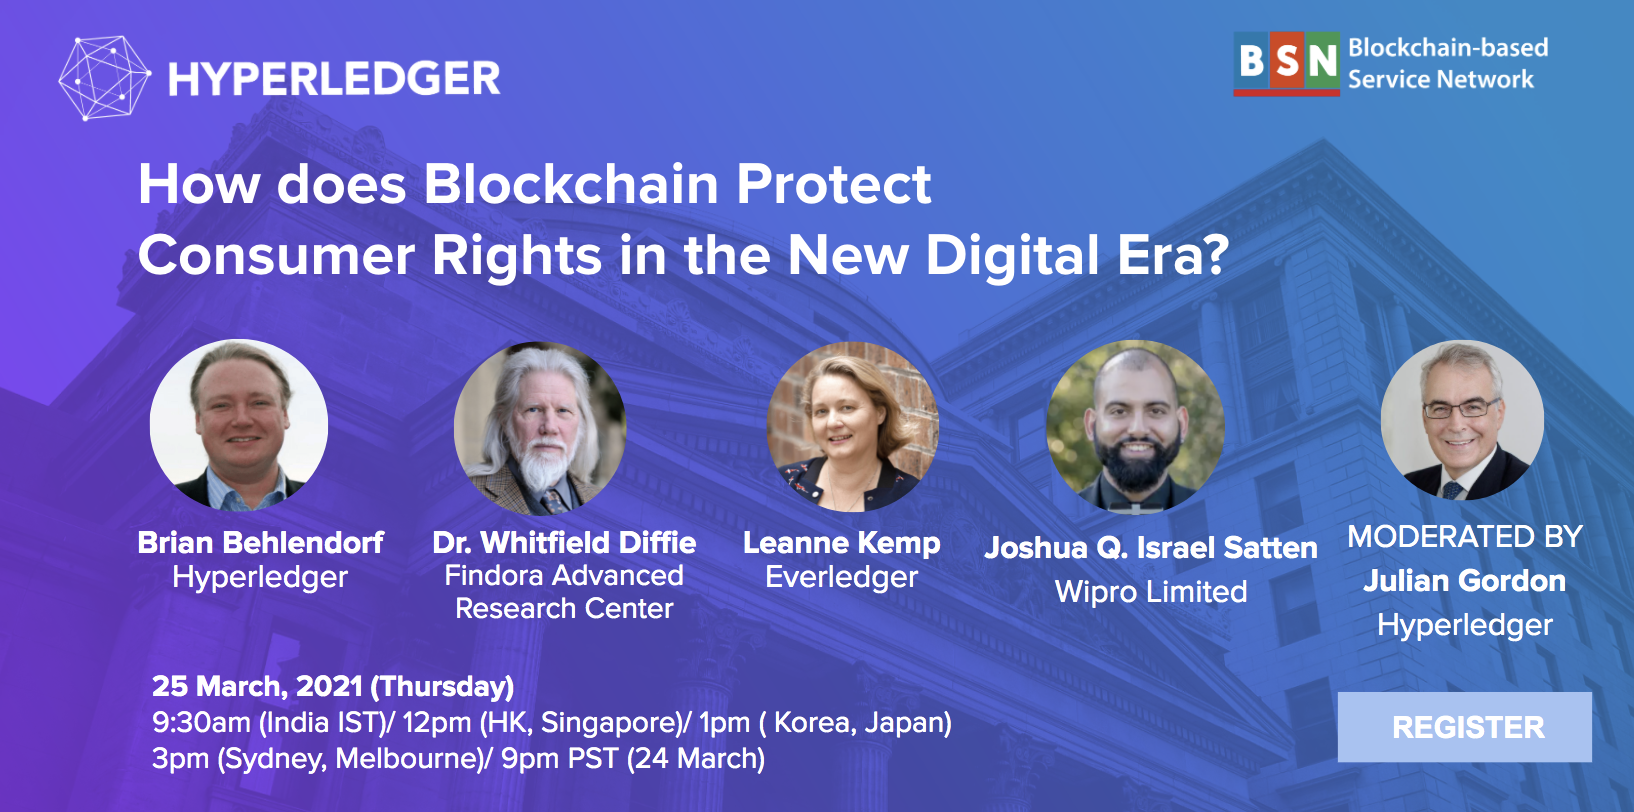 How does Blockchain Protect Consumer Rights in the New Digital Era?